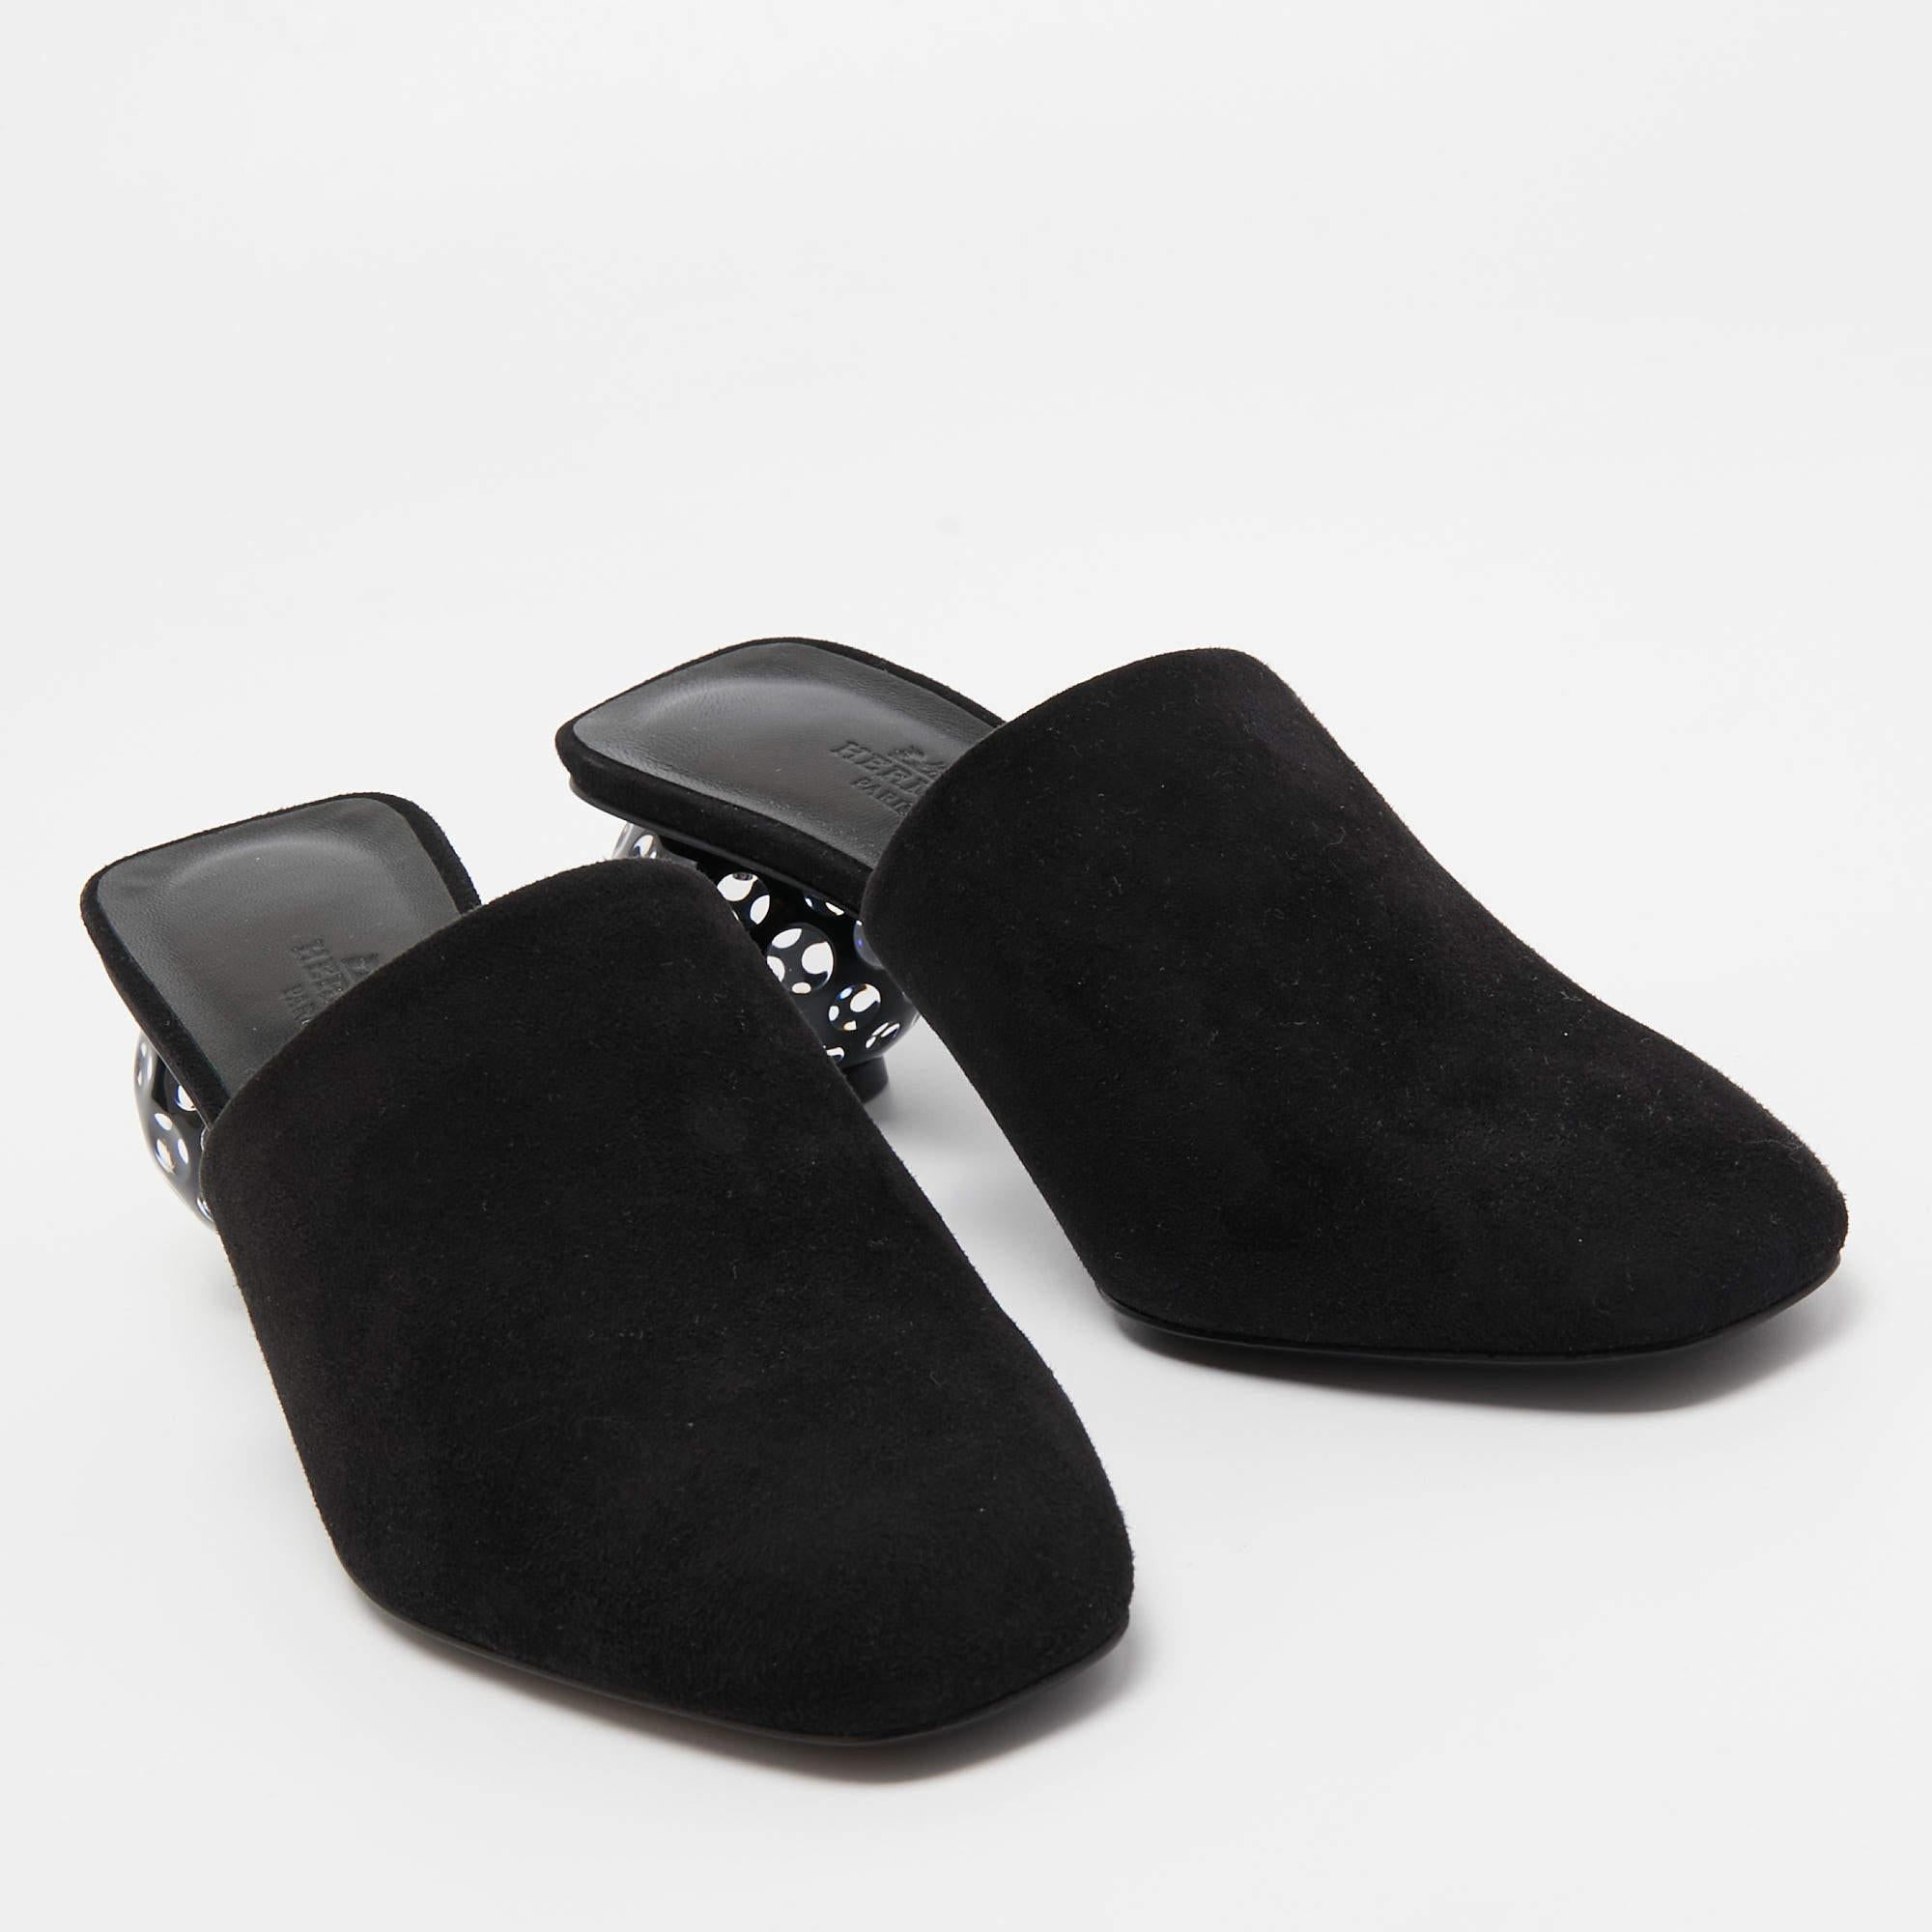 Hermes Black Suede Darcy Mules Size 36.5 3